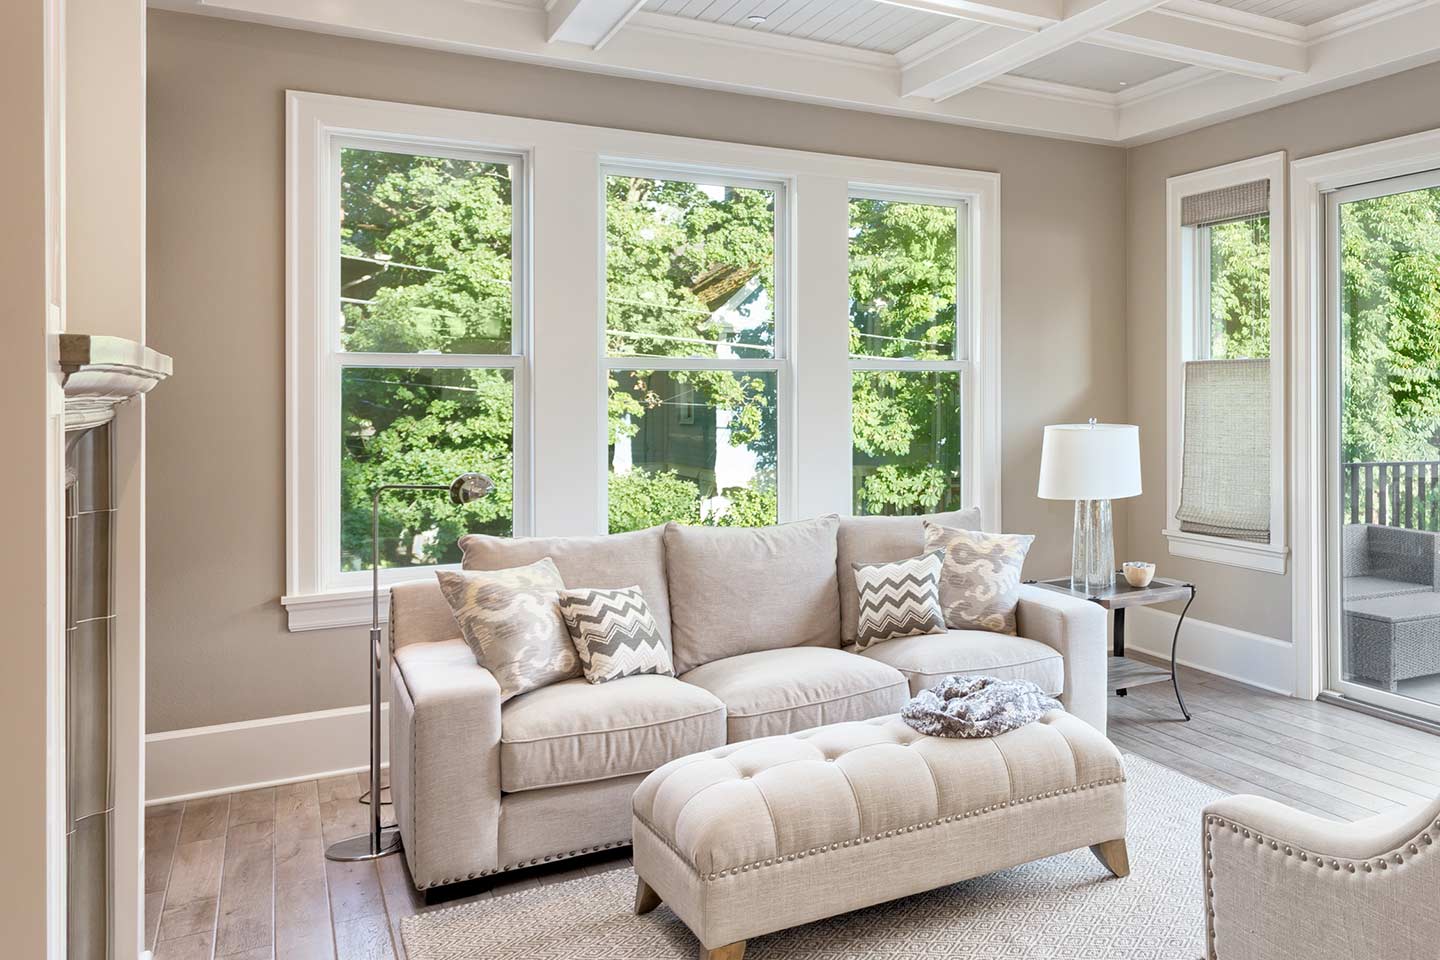 A sitting room with a couch in front of three single hung windows Frame